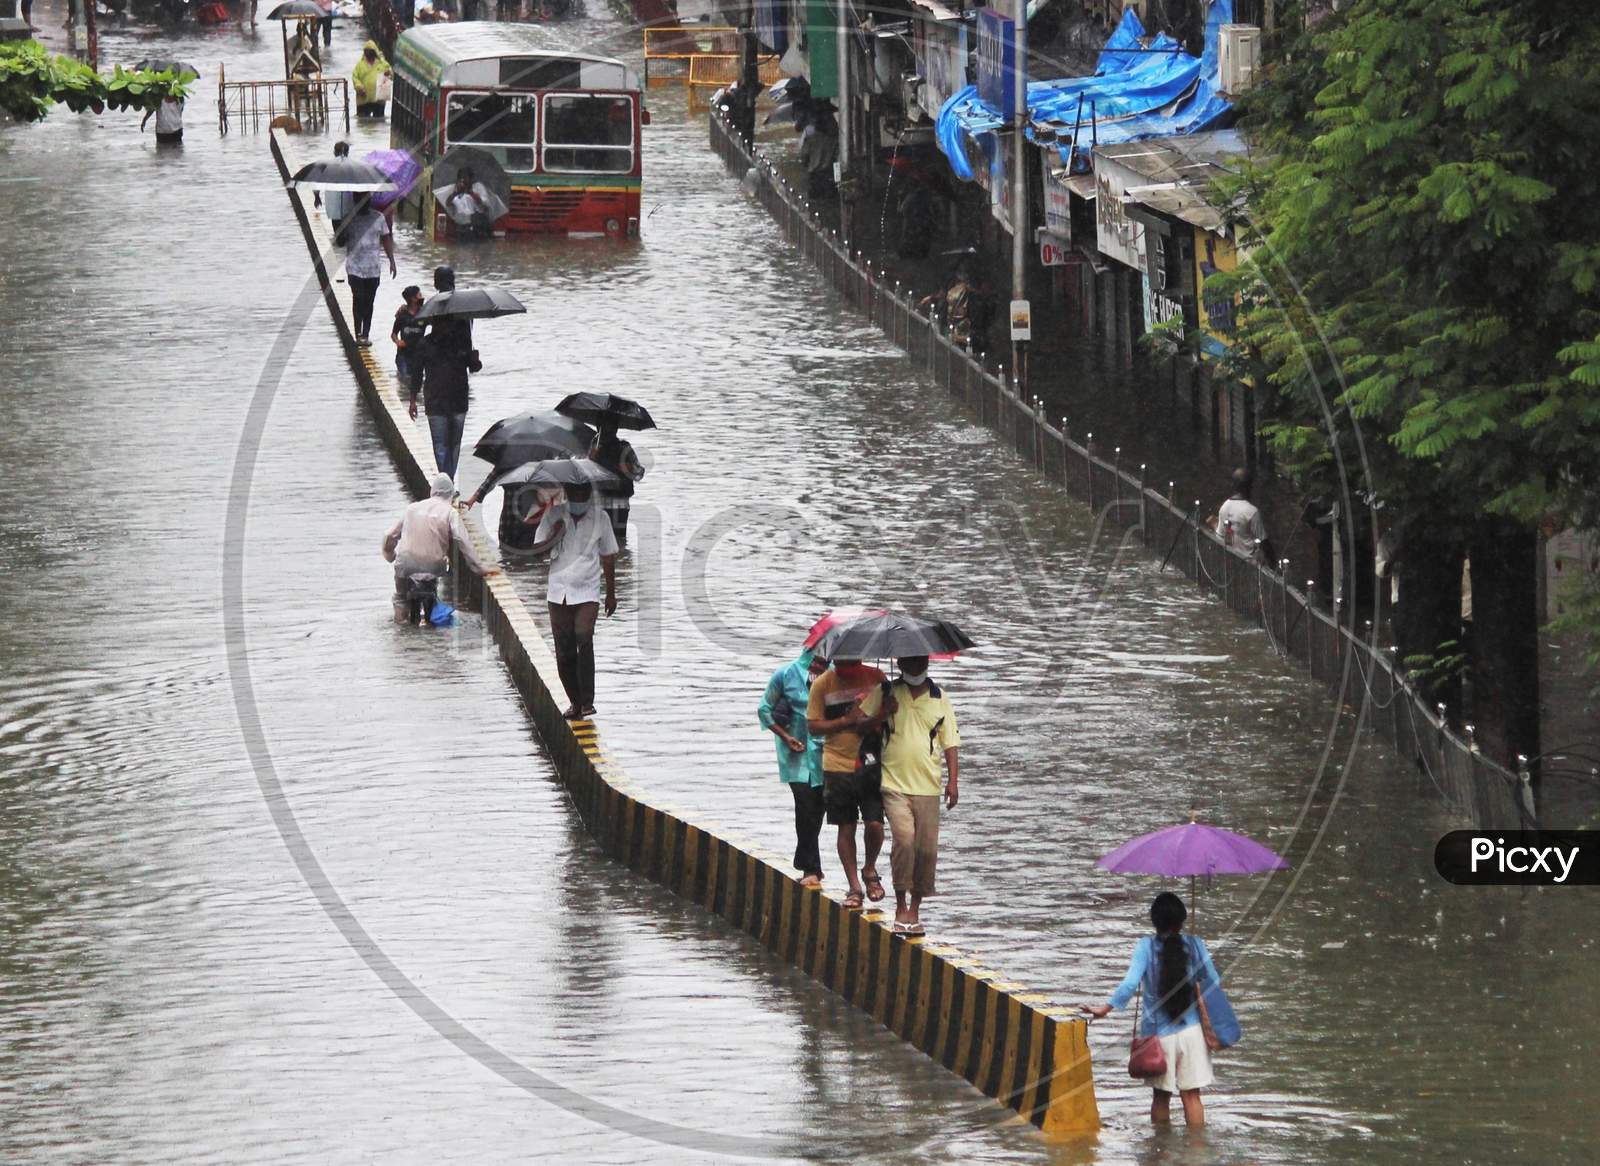 A view shows waterlogged roads during rains, in Mumbai, India on August 4, 2020.